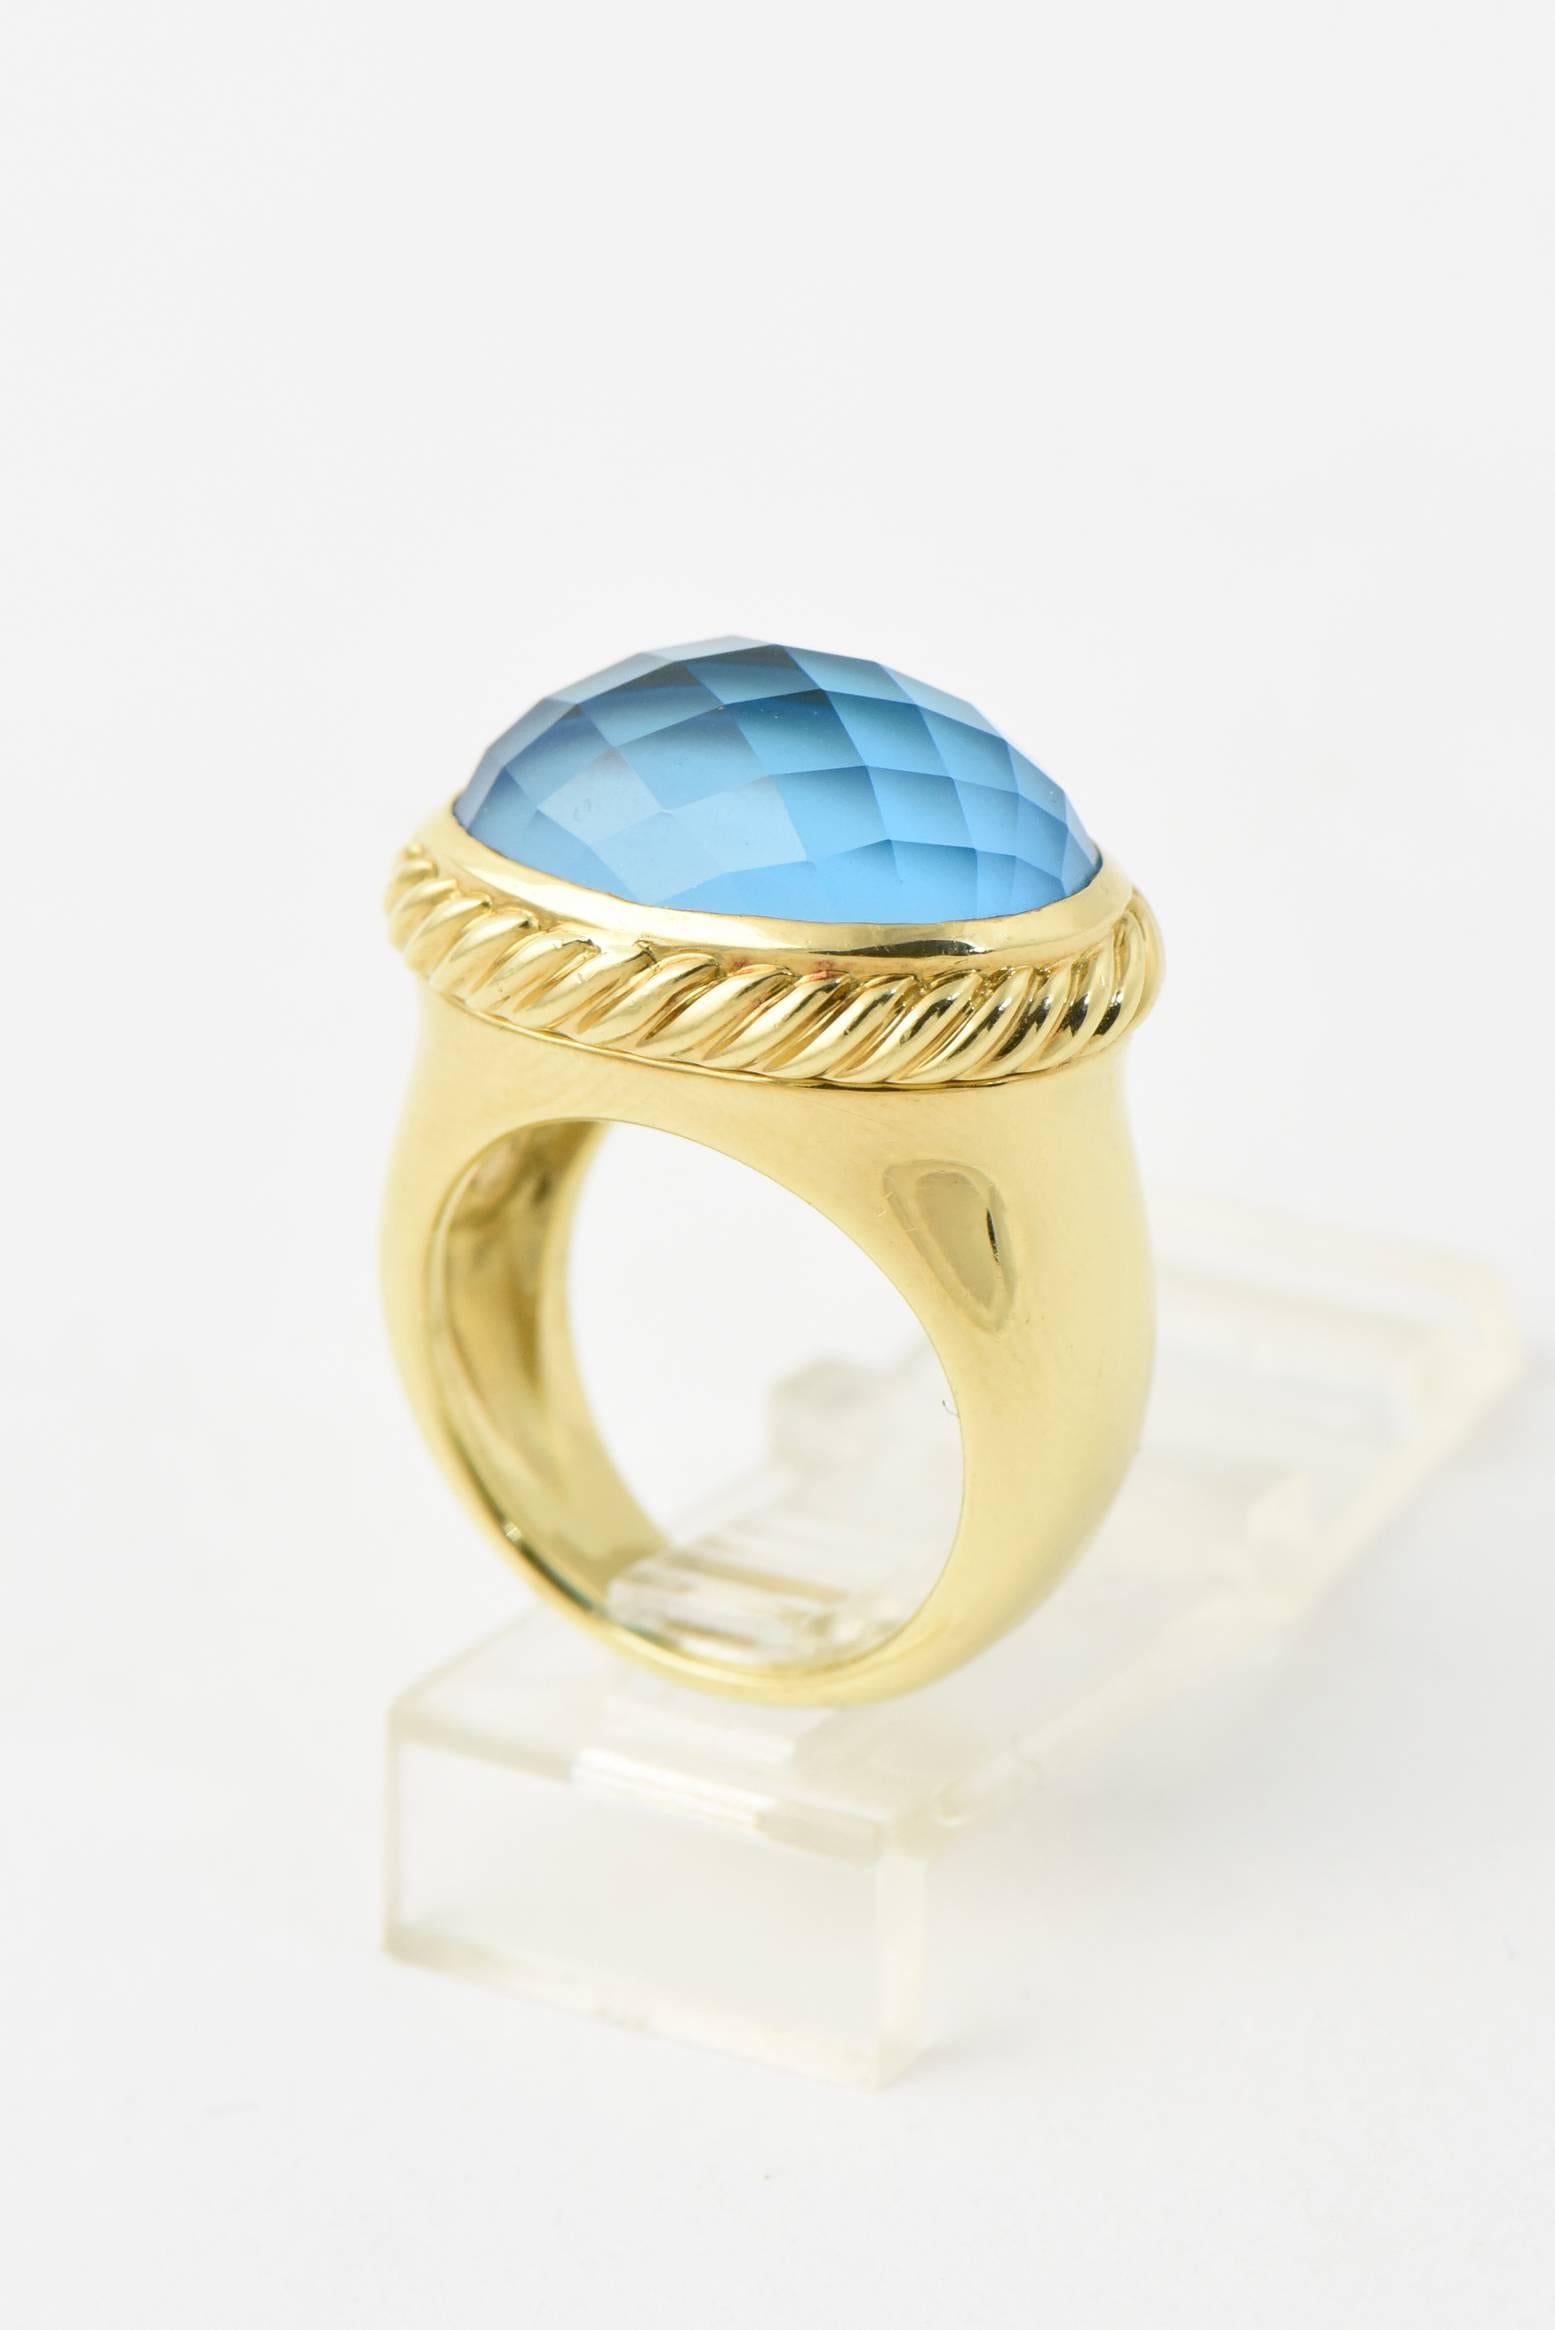 David Yurman 18k yellow gold east - west signature ring with faceted blue topaz mounted in a cable frame. The band is solid gold with a smooth finish.  Marked 